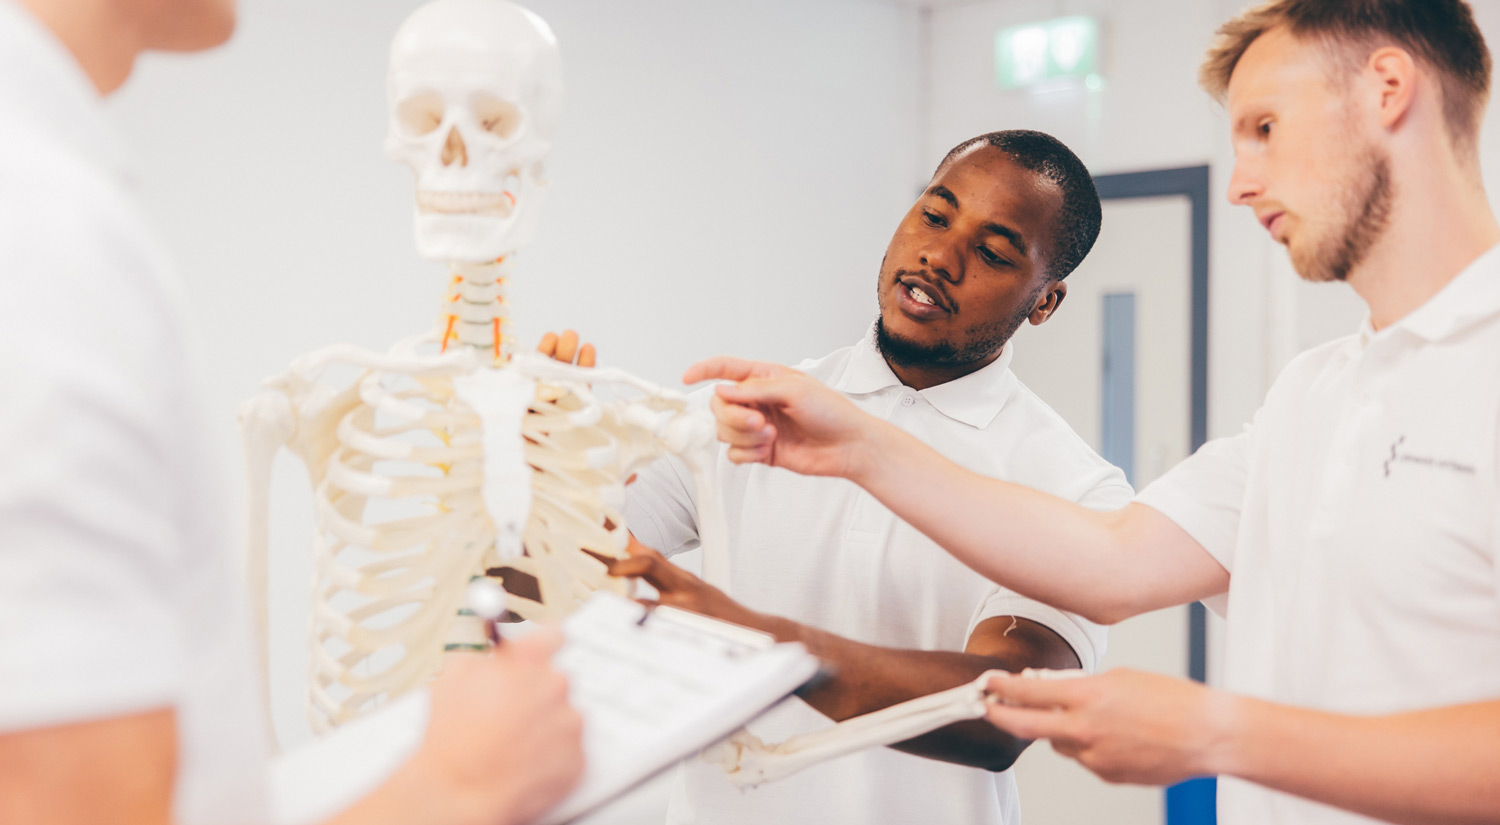 Physiotherapy students studying the human skeleton